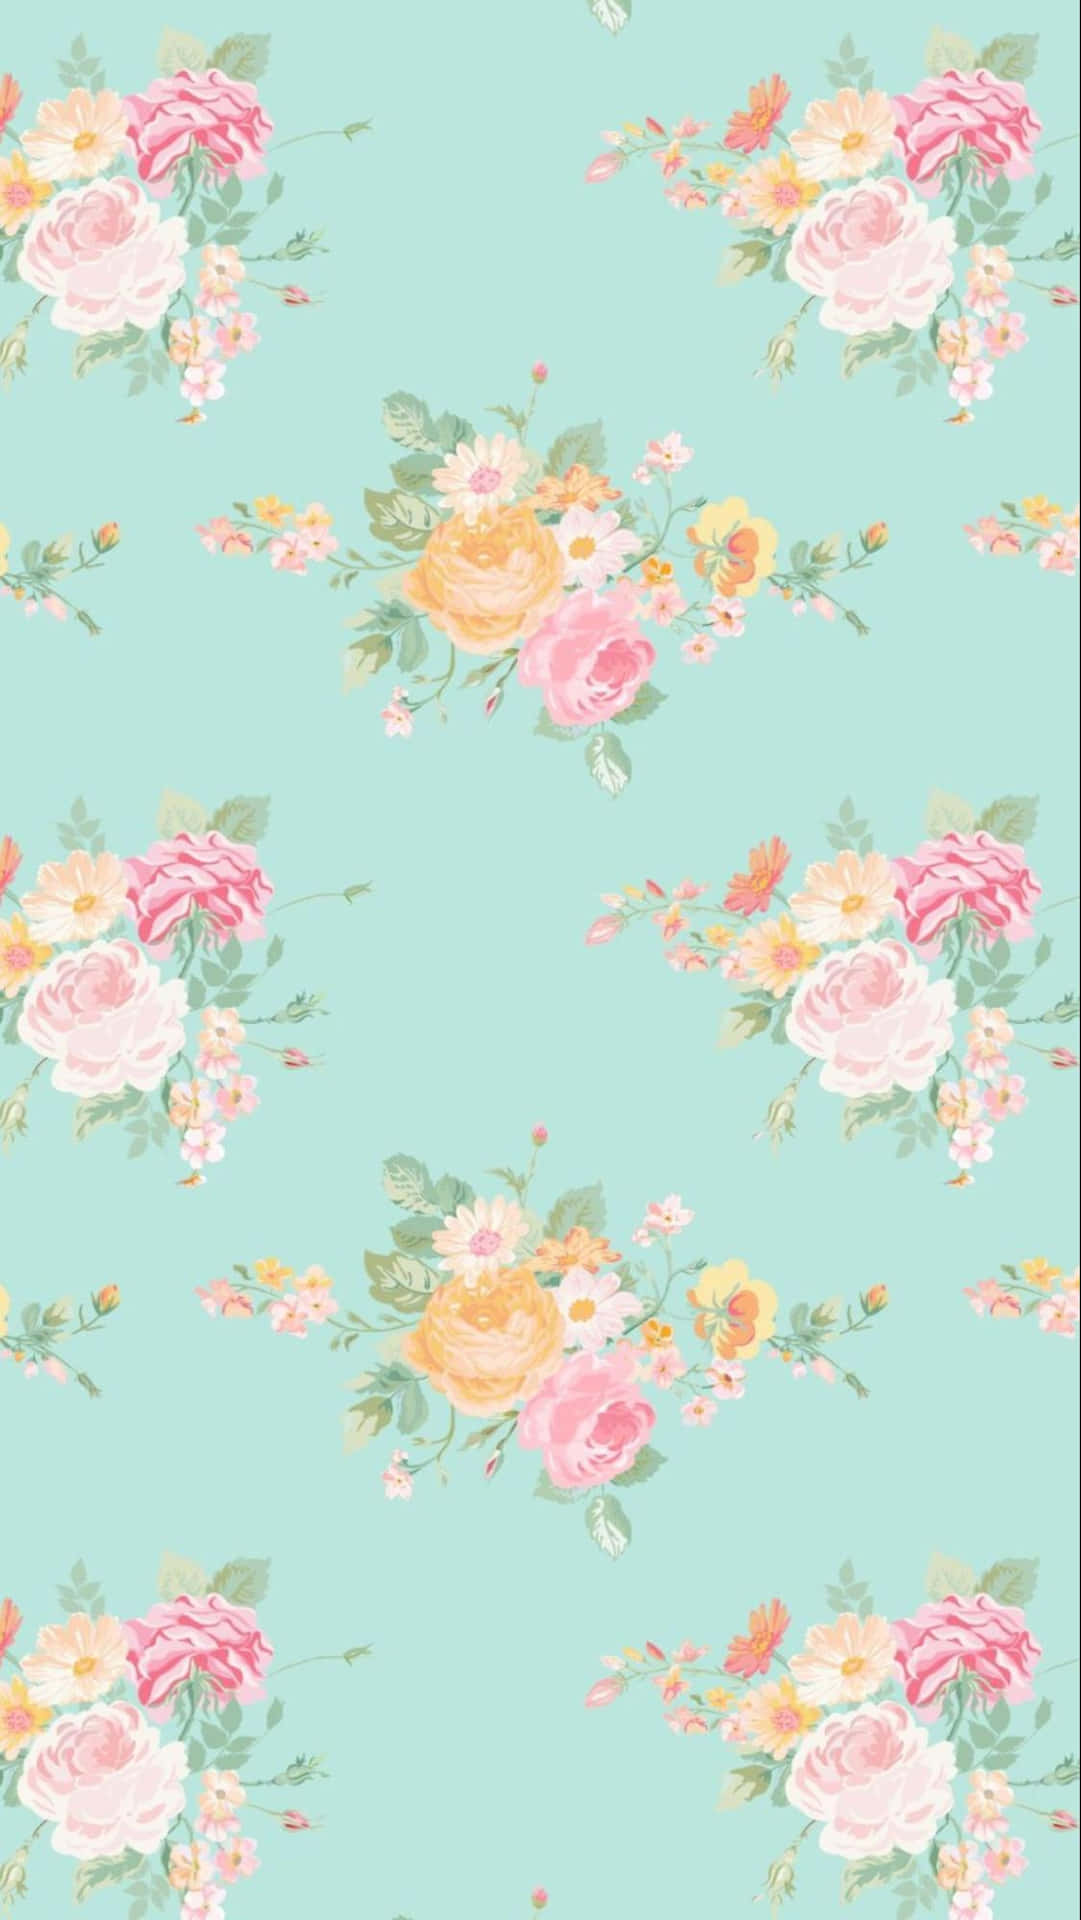 Pastel Colors On A Chic Flower Wallpaper Wallpaper